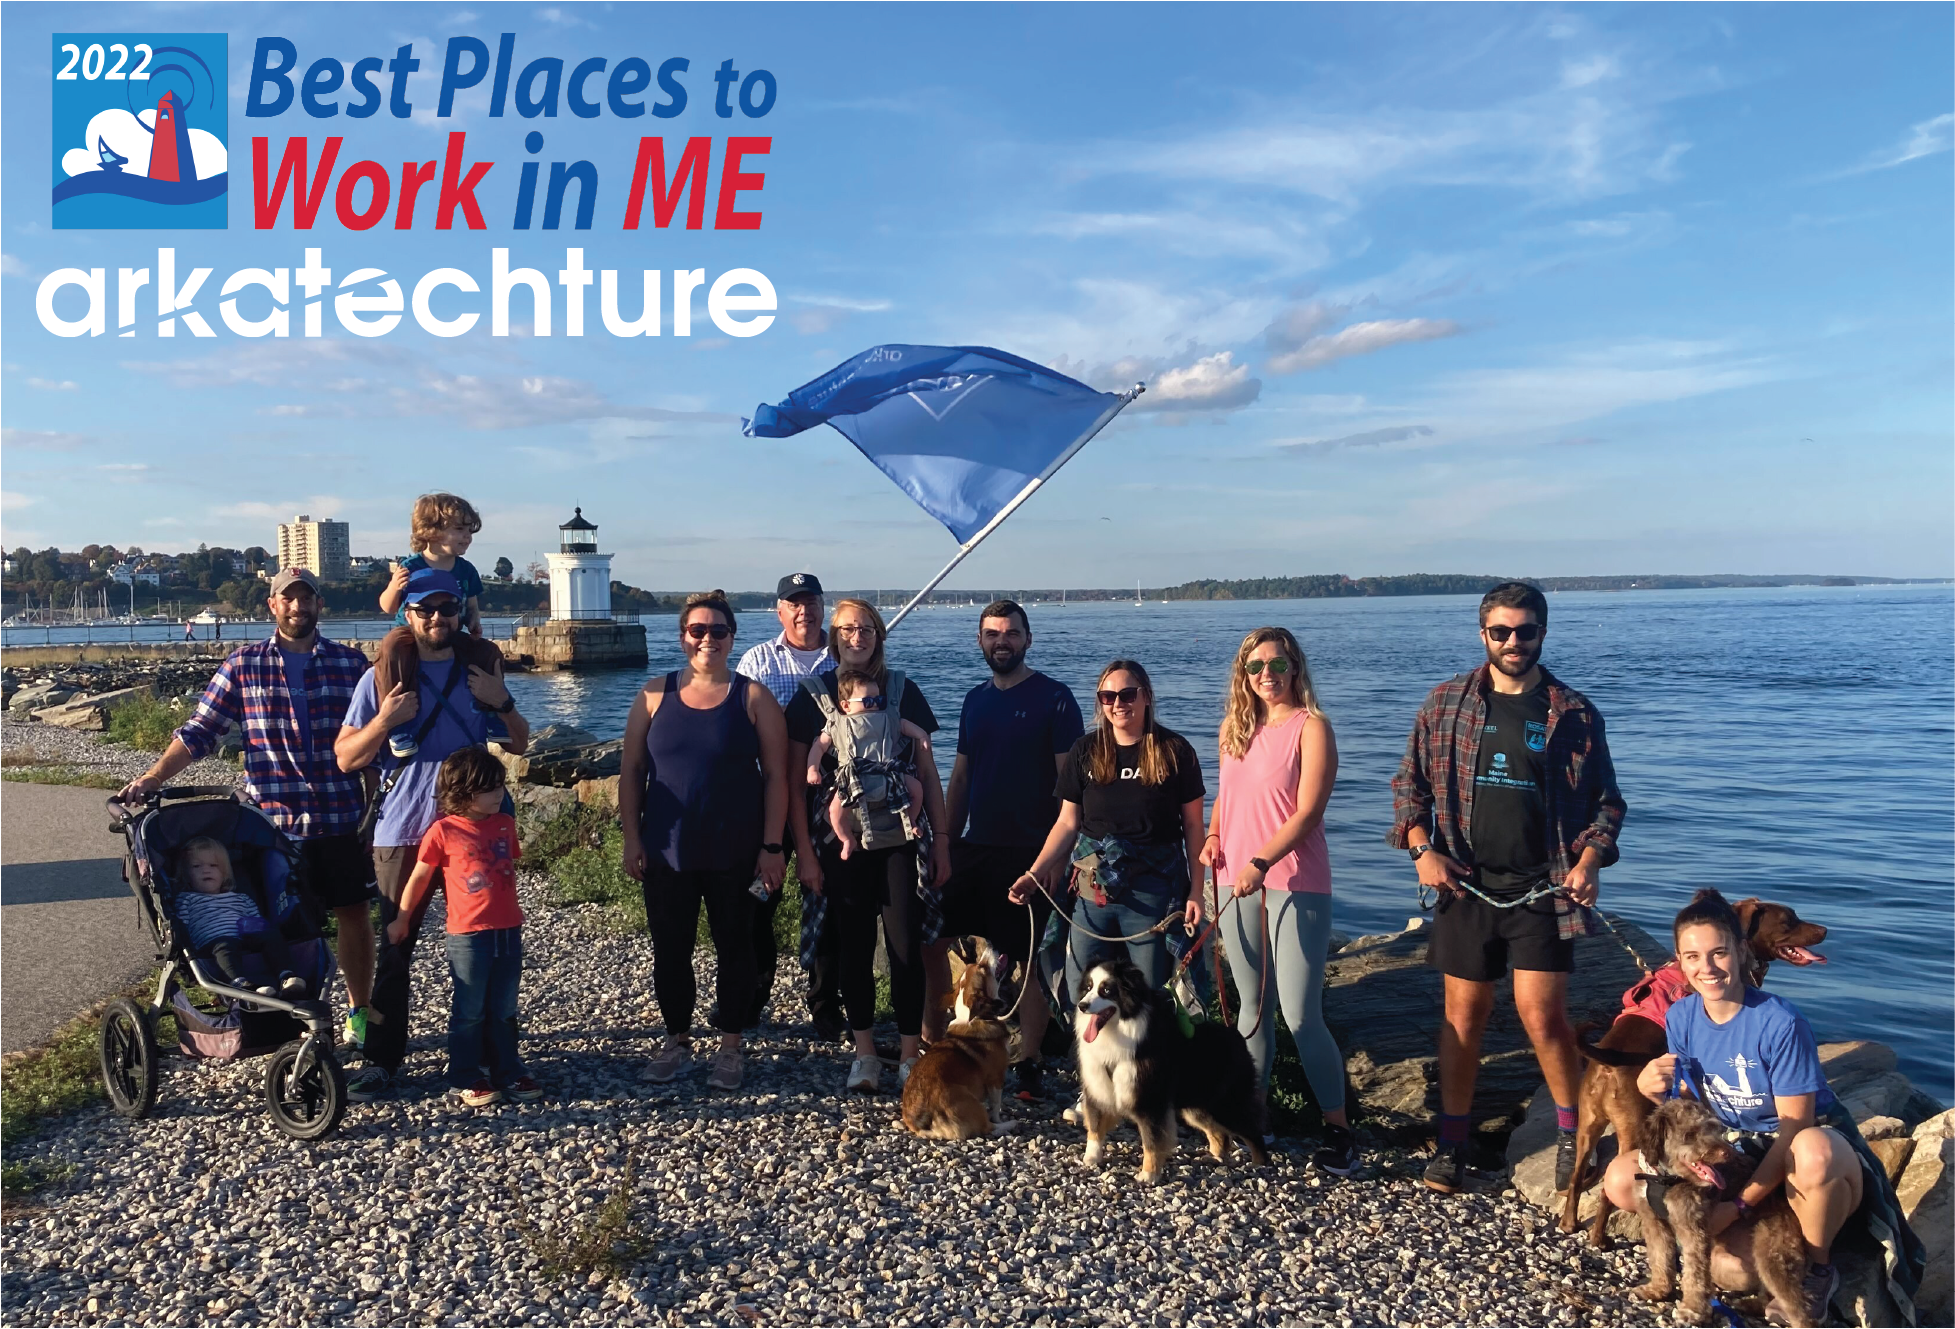 Best Places to Work in Maine 2022- Arkatechture